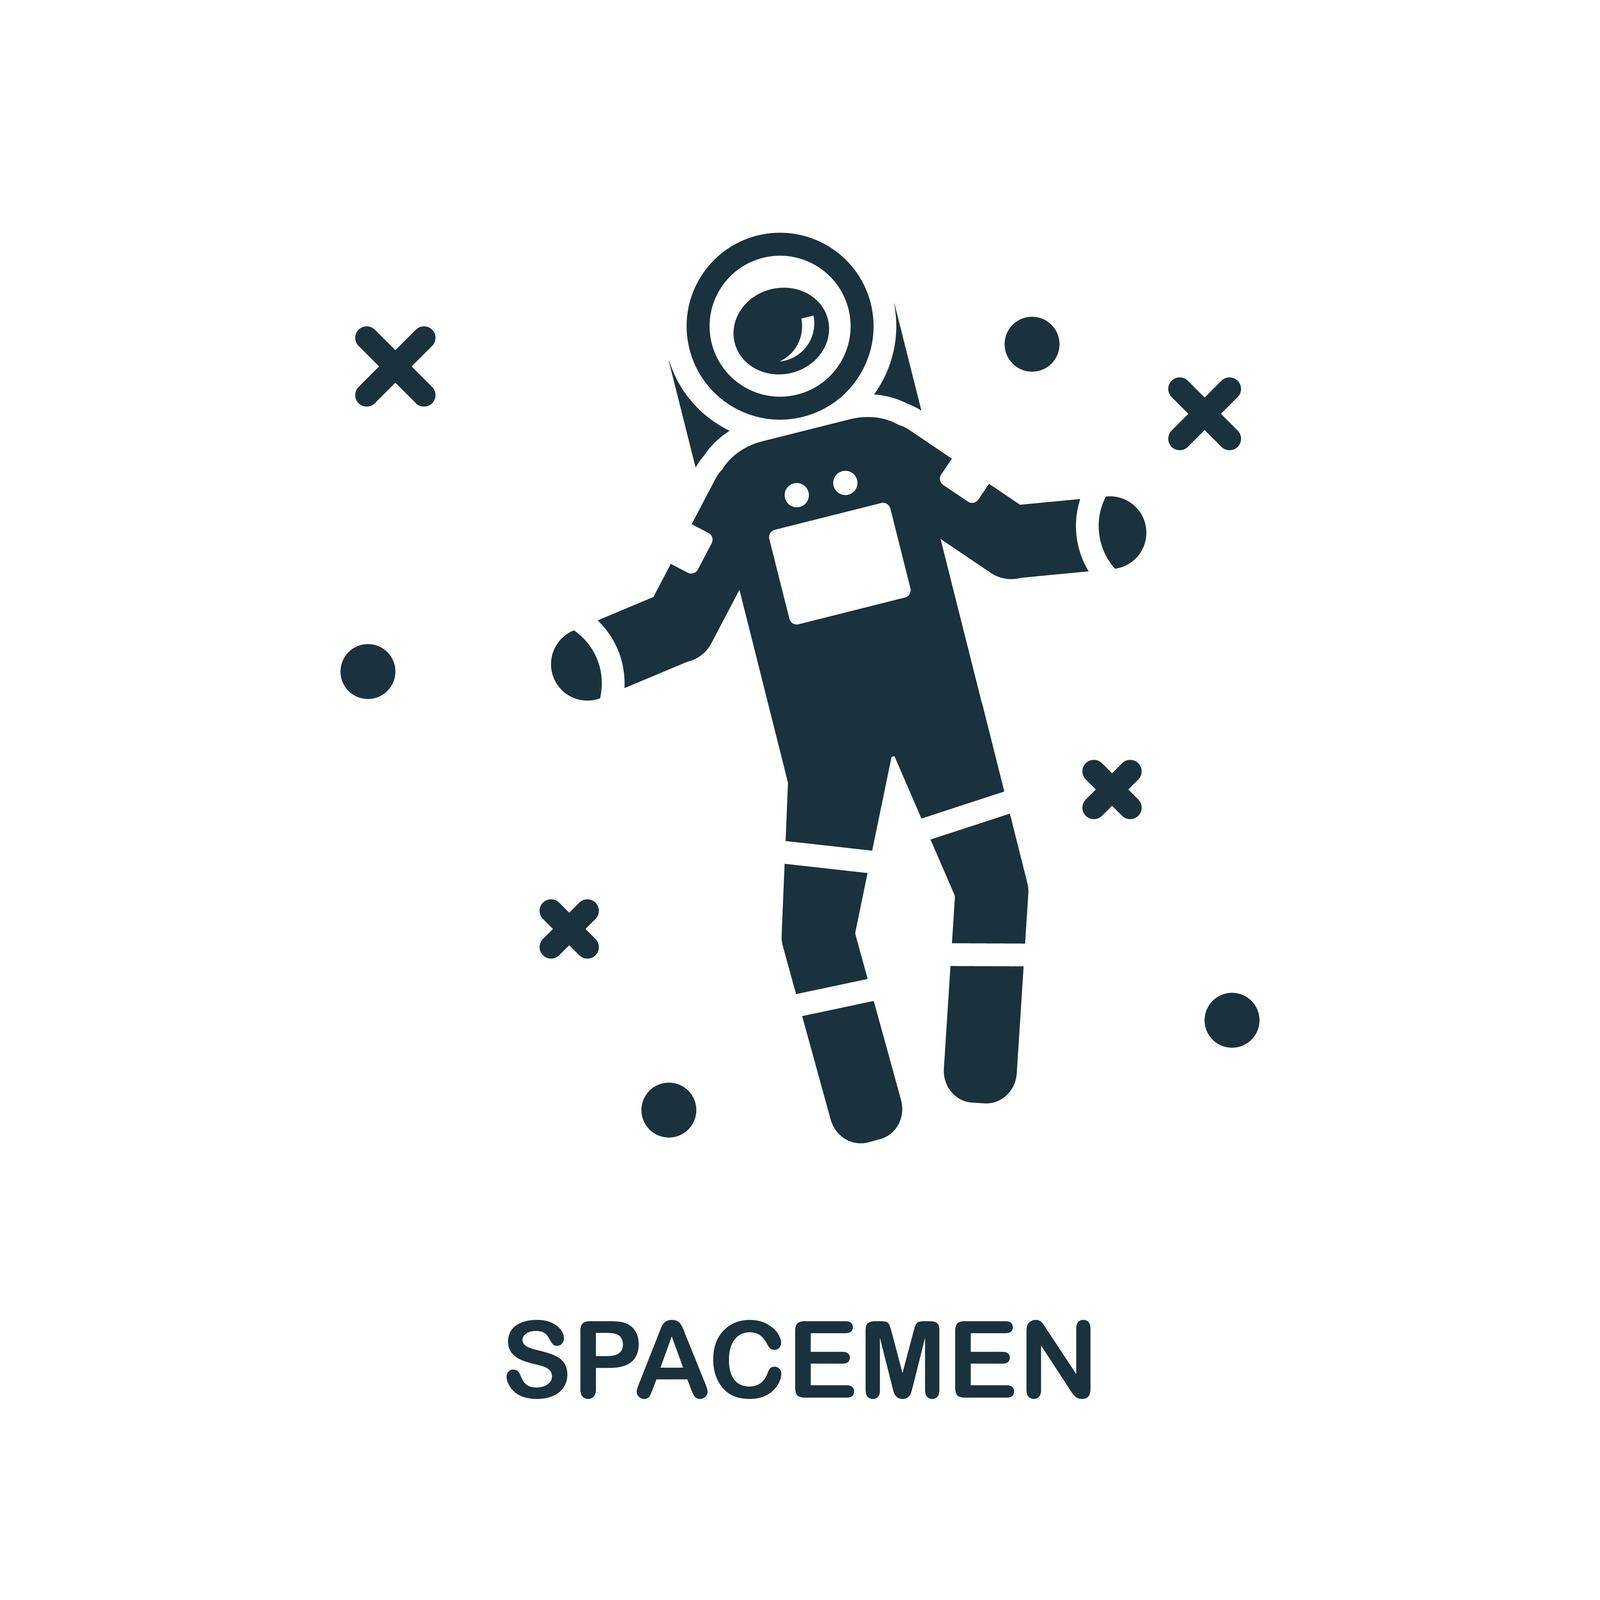 Spacemen icon. Black sign from space collection. Creative Spacemen icon for web design, templates and infographics.